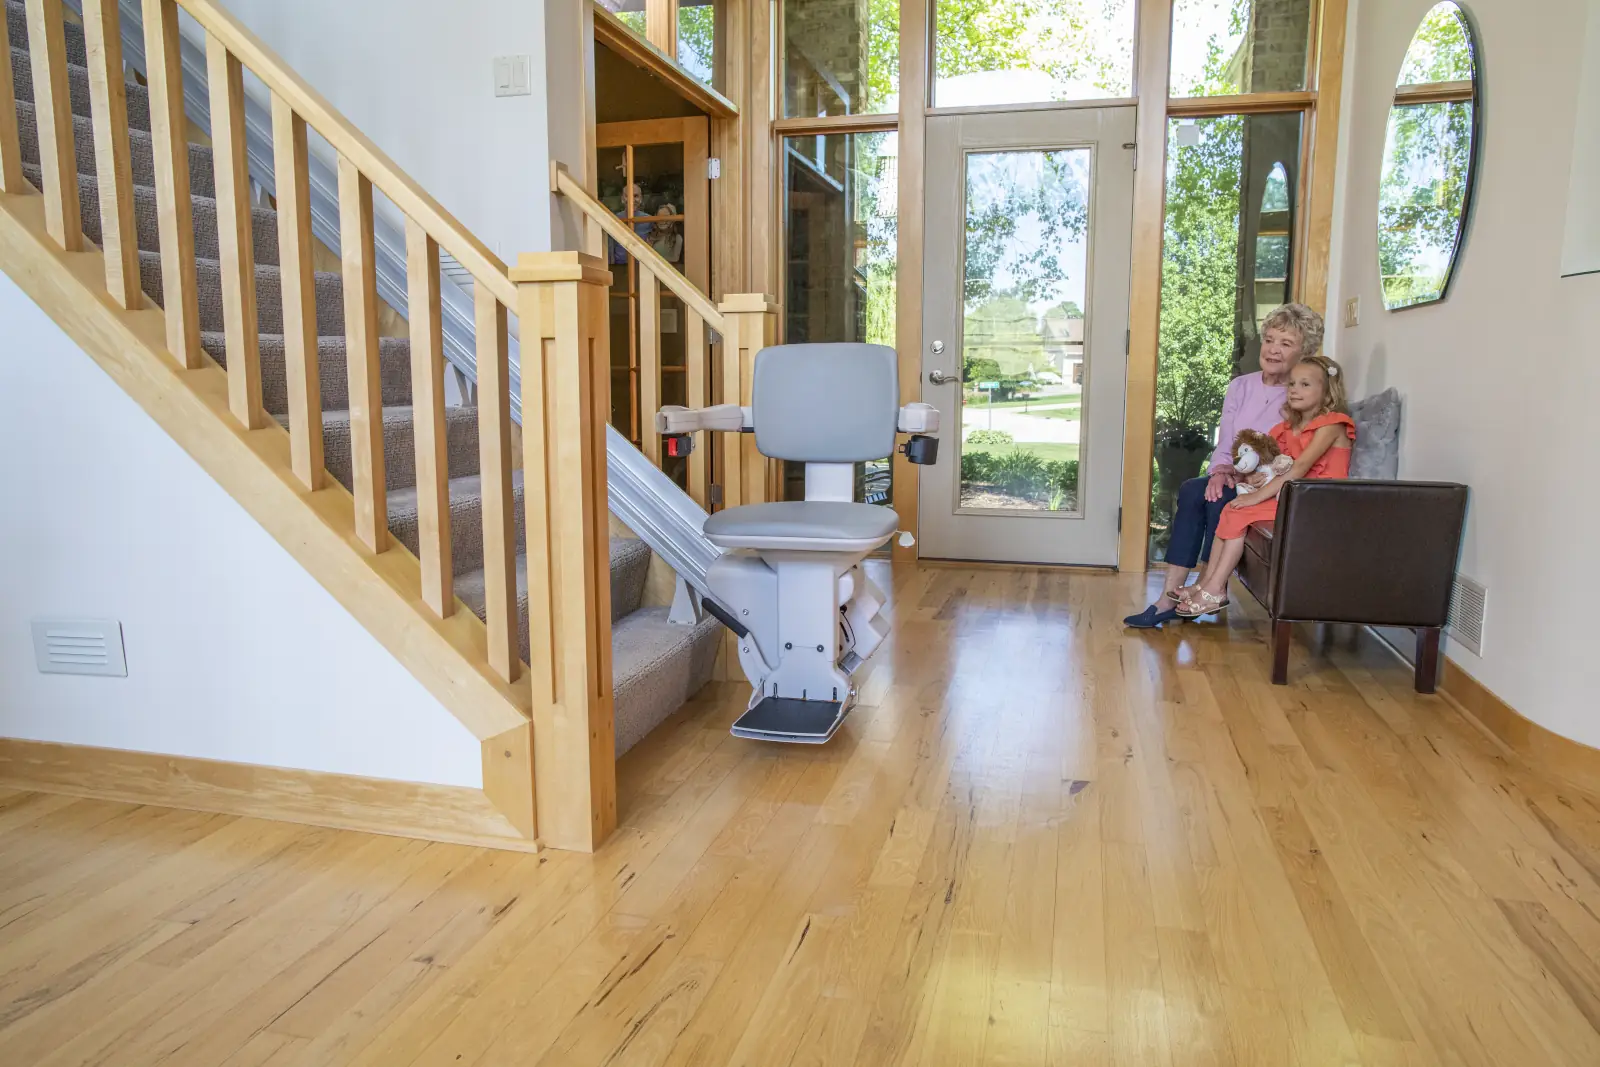 Stairlifts Explained: Everything You Need To Know About Buying A Stairlift